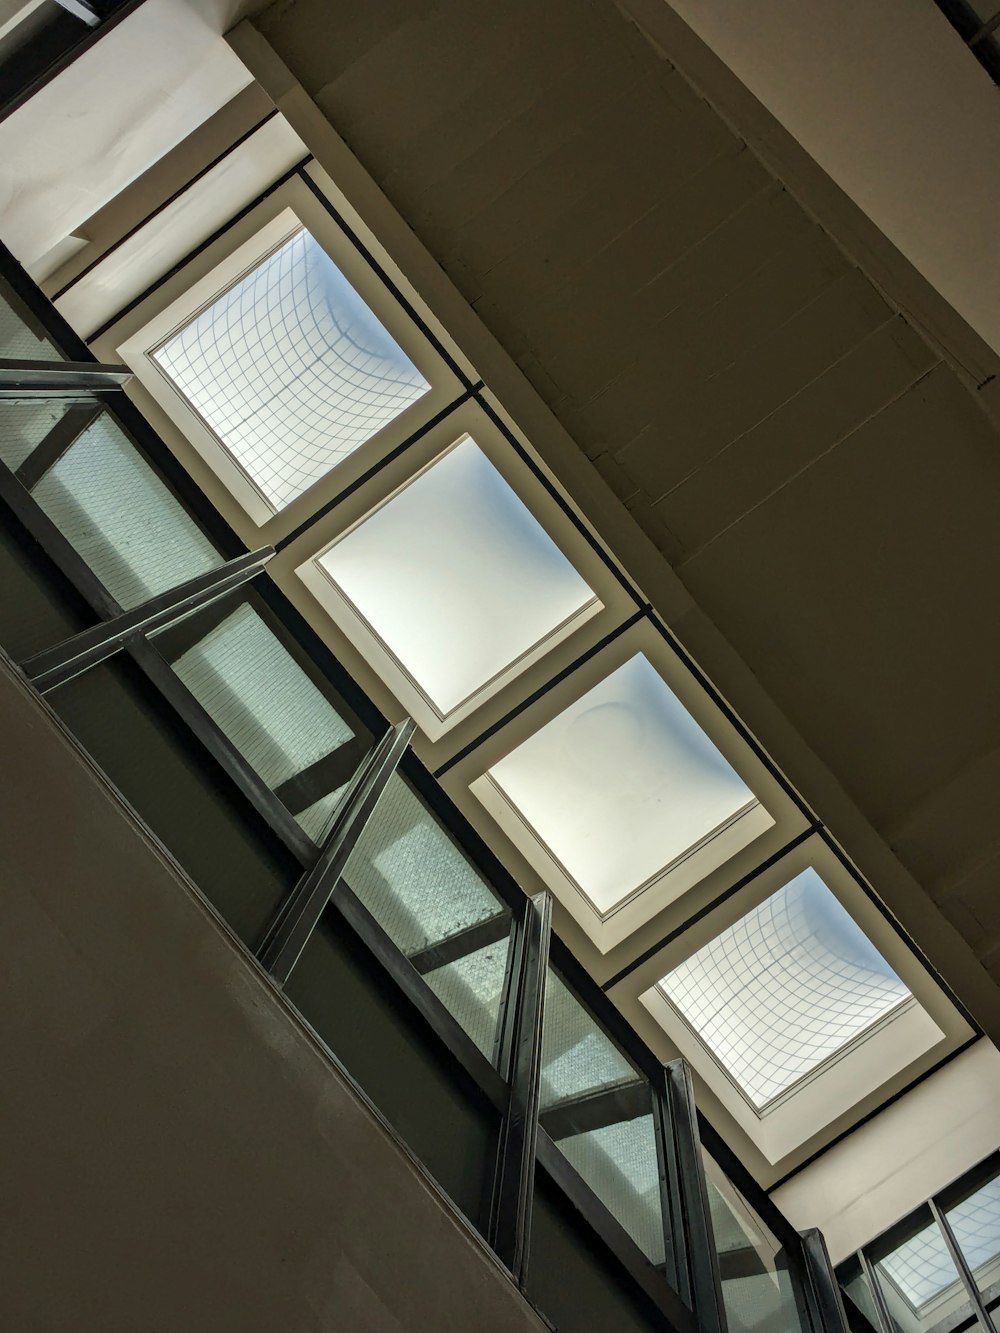 the ceiling of a building with a skylight above it